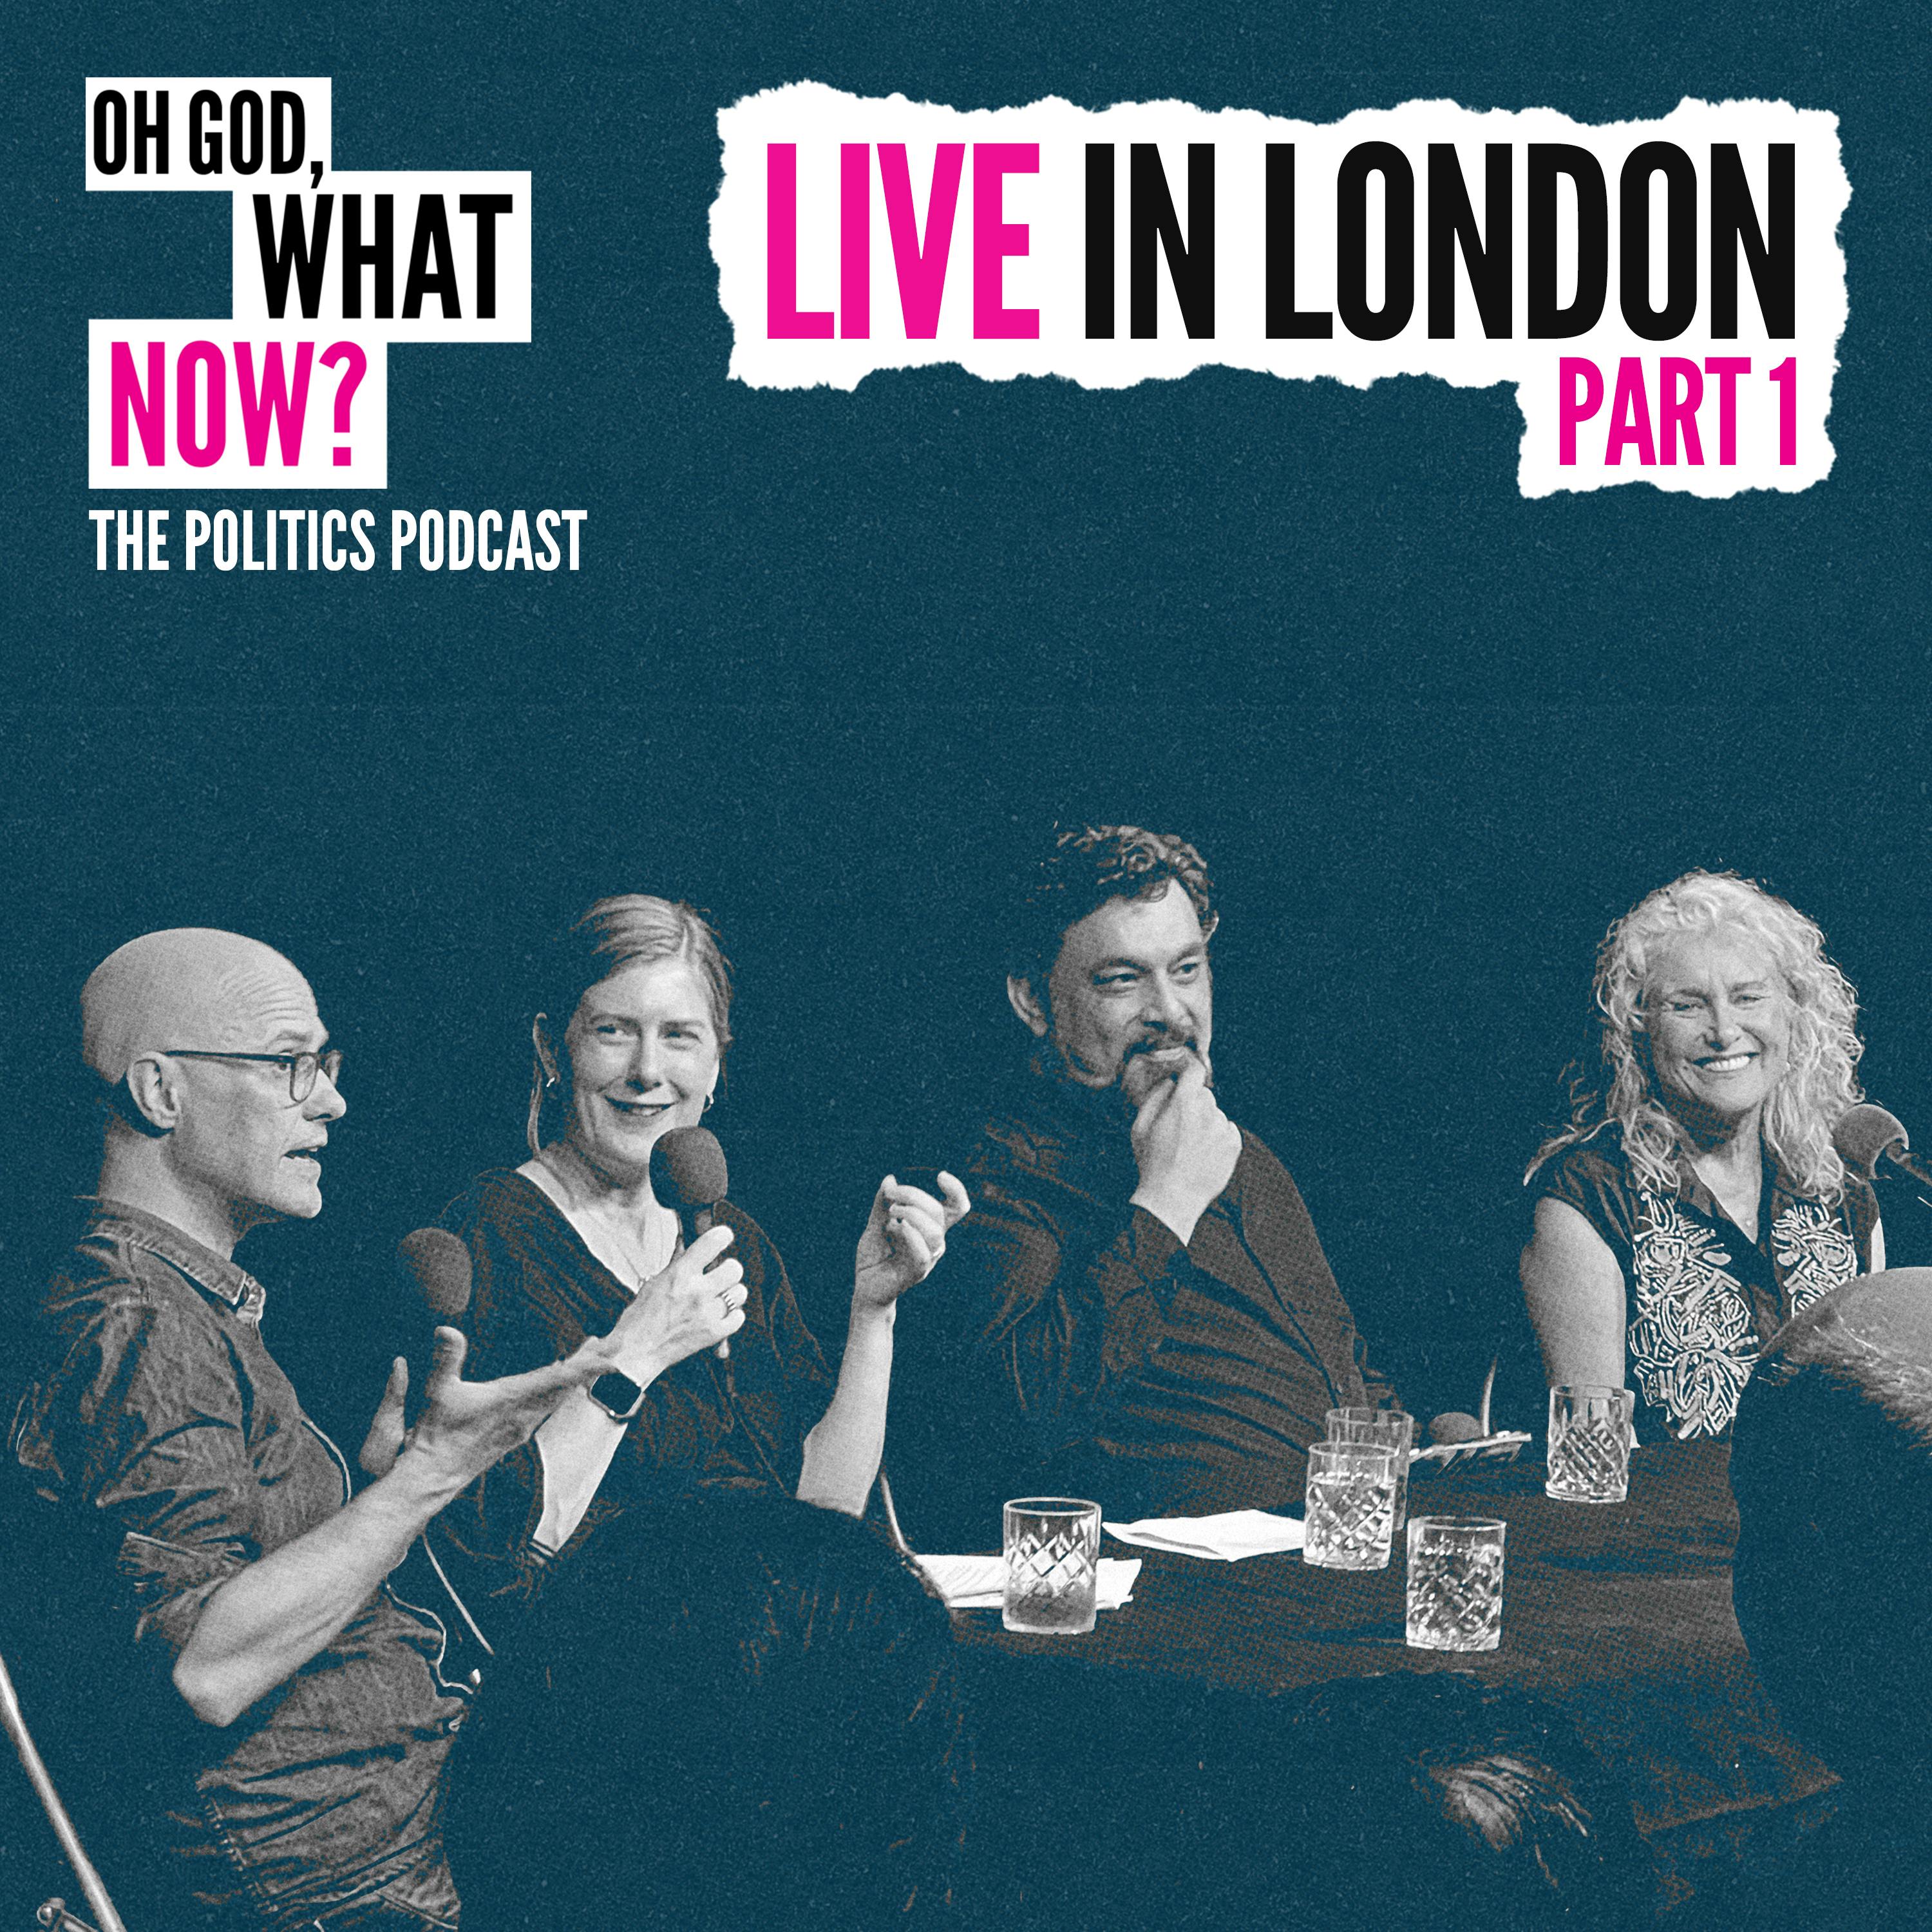 Live in London Part 1 with special guest Jan Ravens